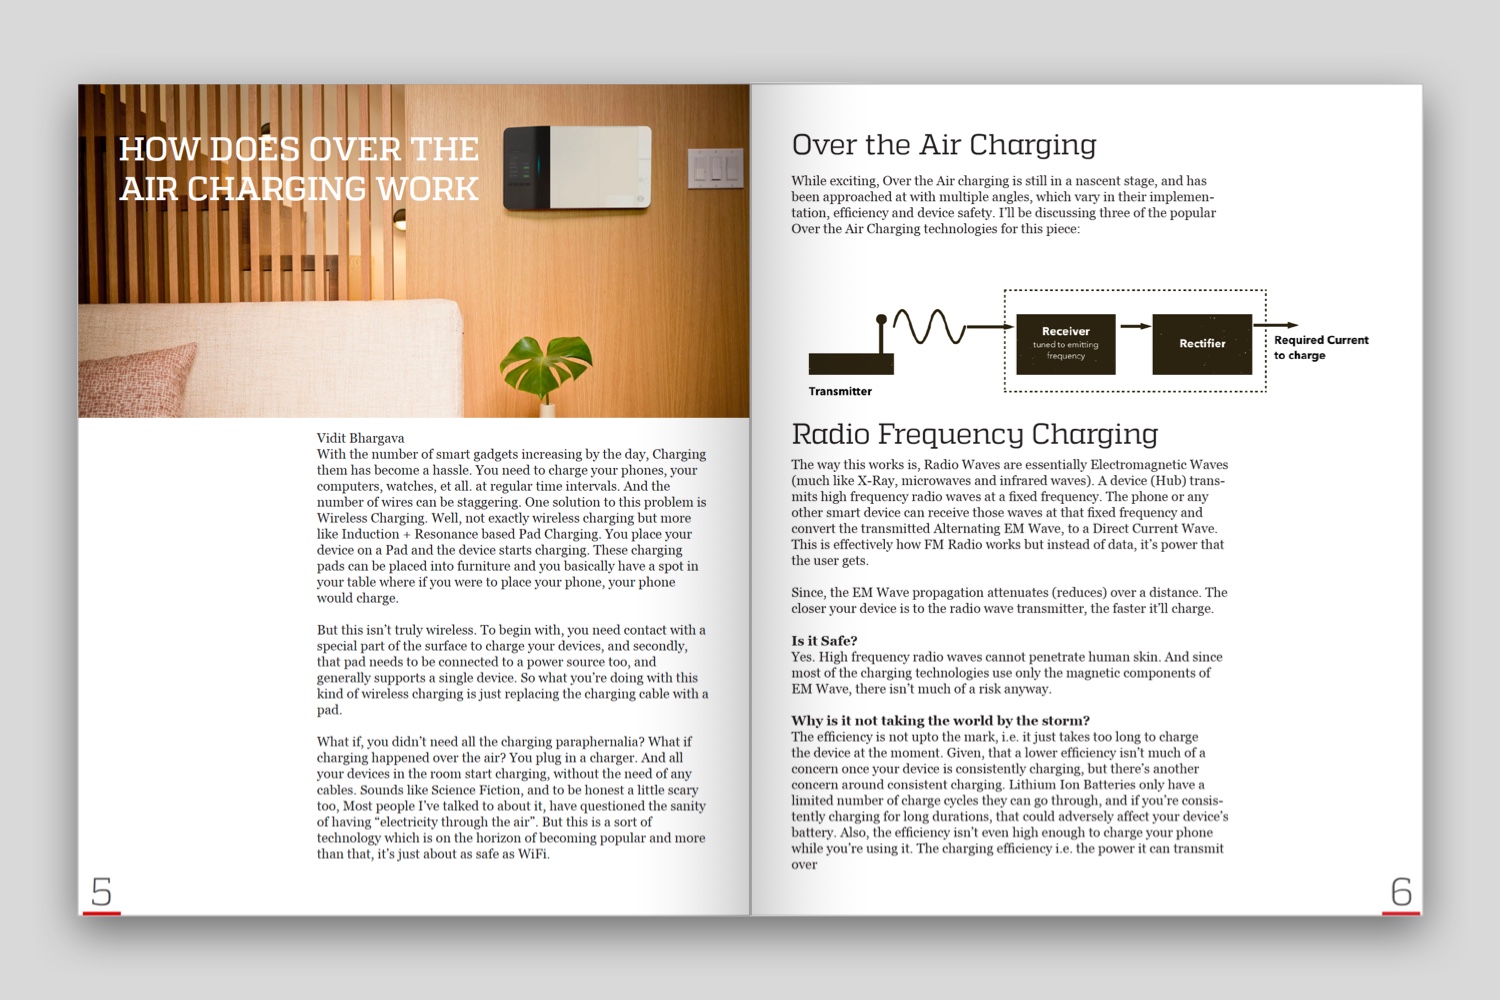 Explaining Concepts: Image of article from eZine explaining the concept of Over the Air Charging